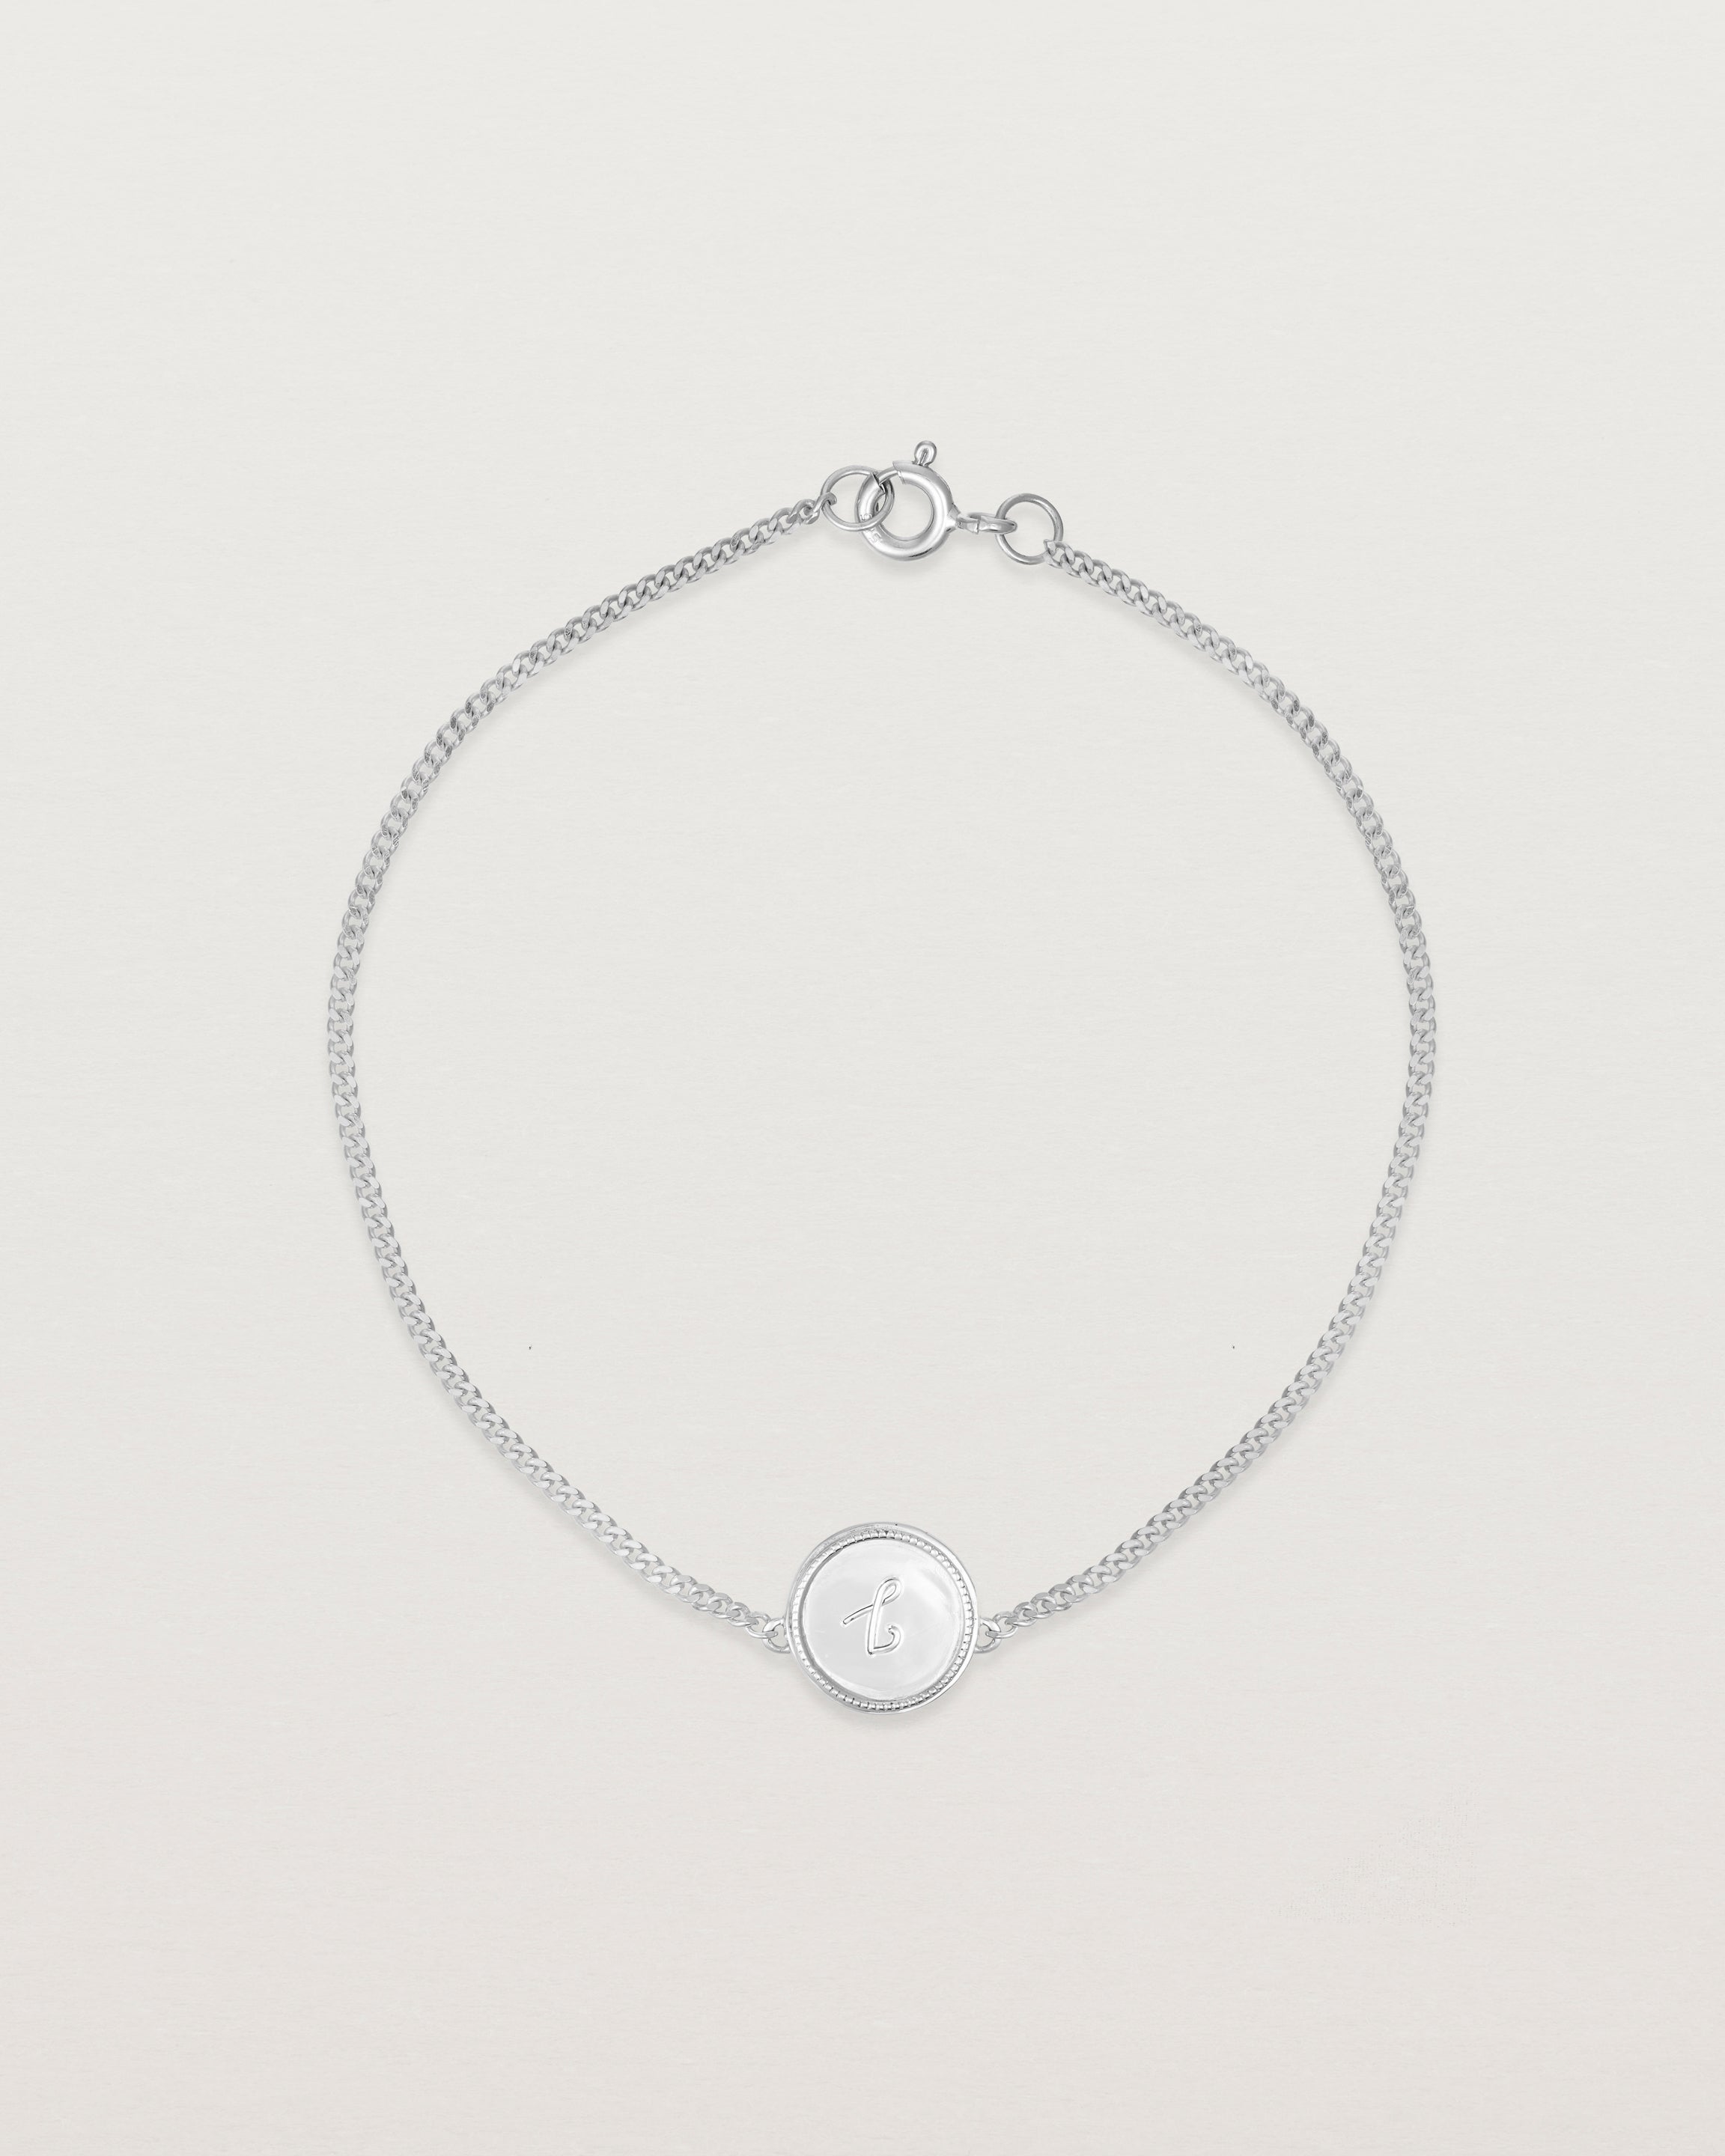 Top down view of the Precious Initial Bracelet in white gold.